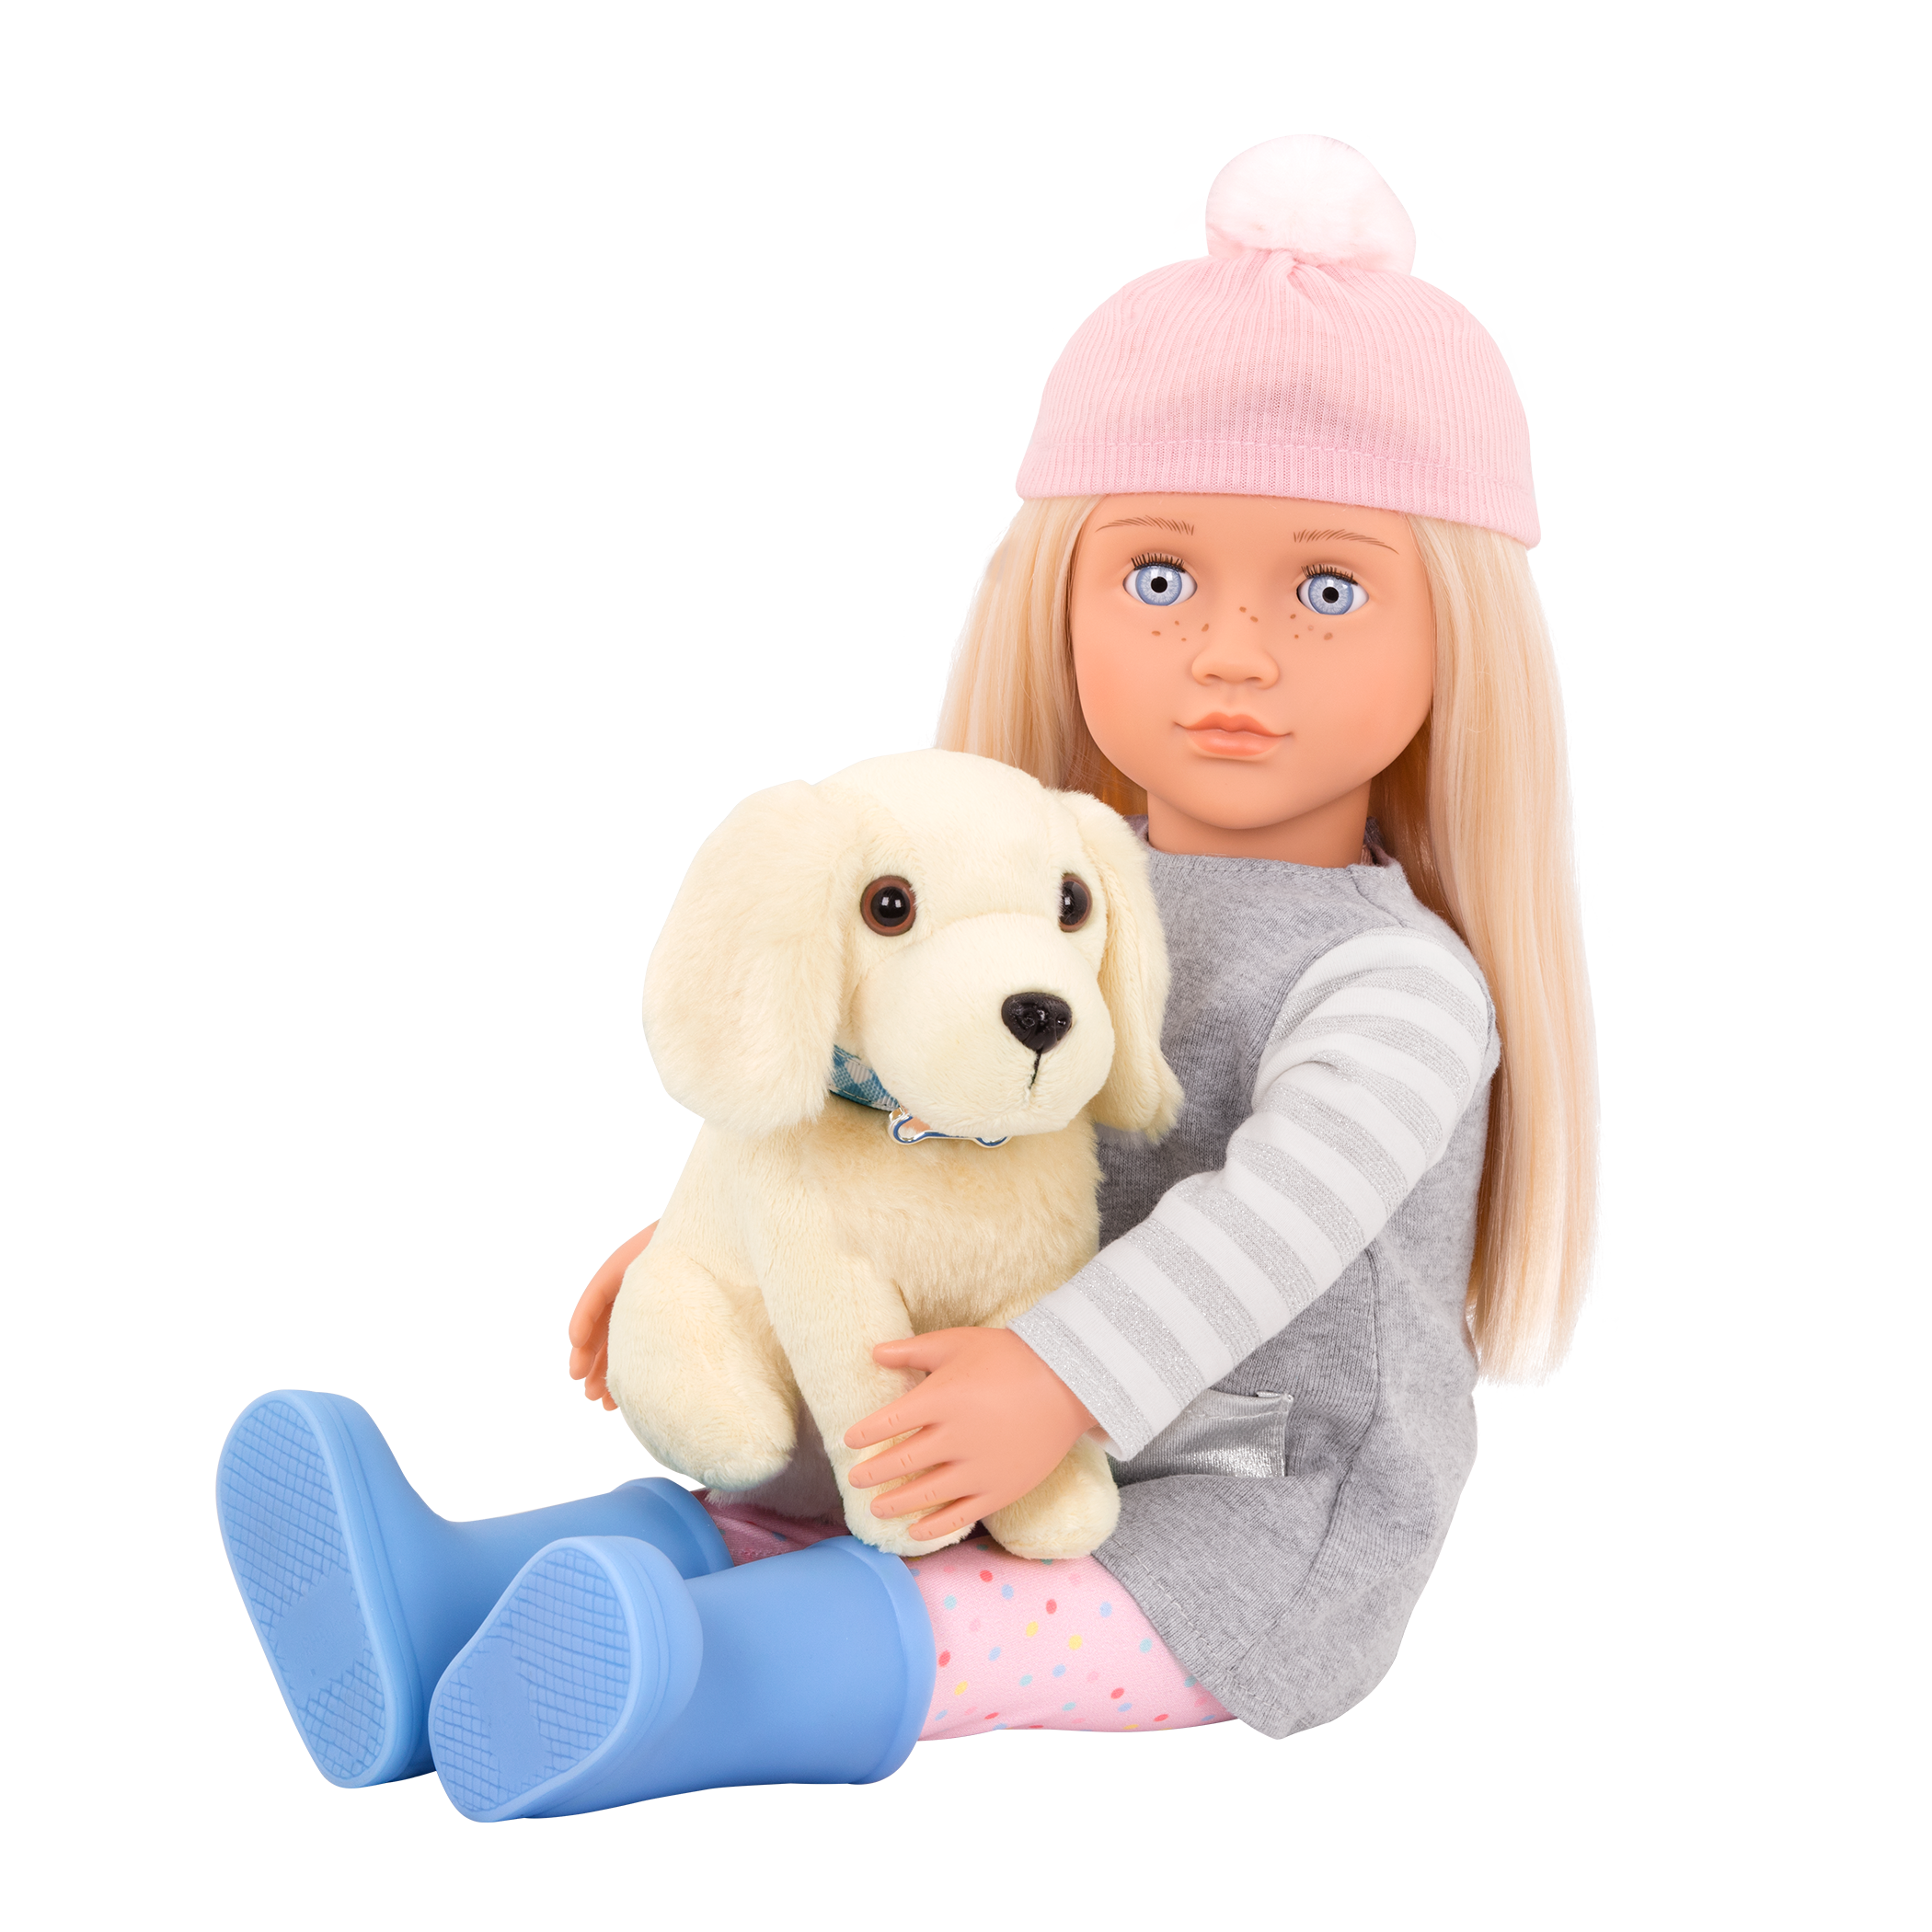 18-inch doll with blonde hair, pale blue eyes and dog accessories walking golden retriever plushie